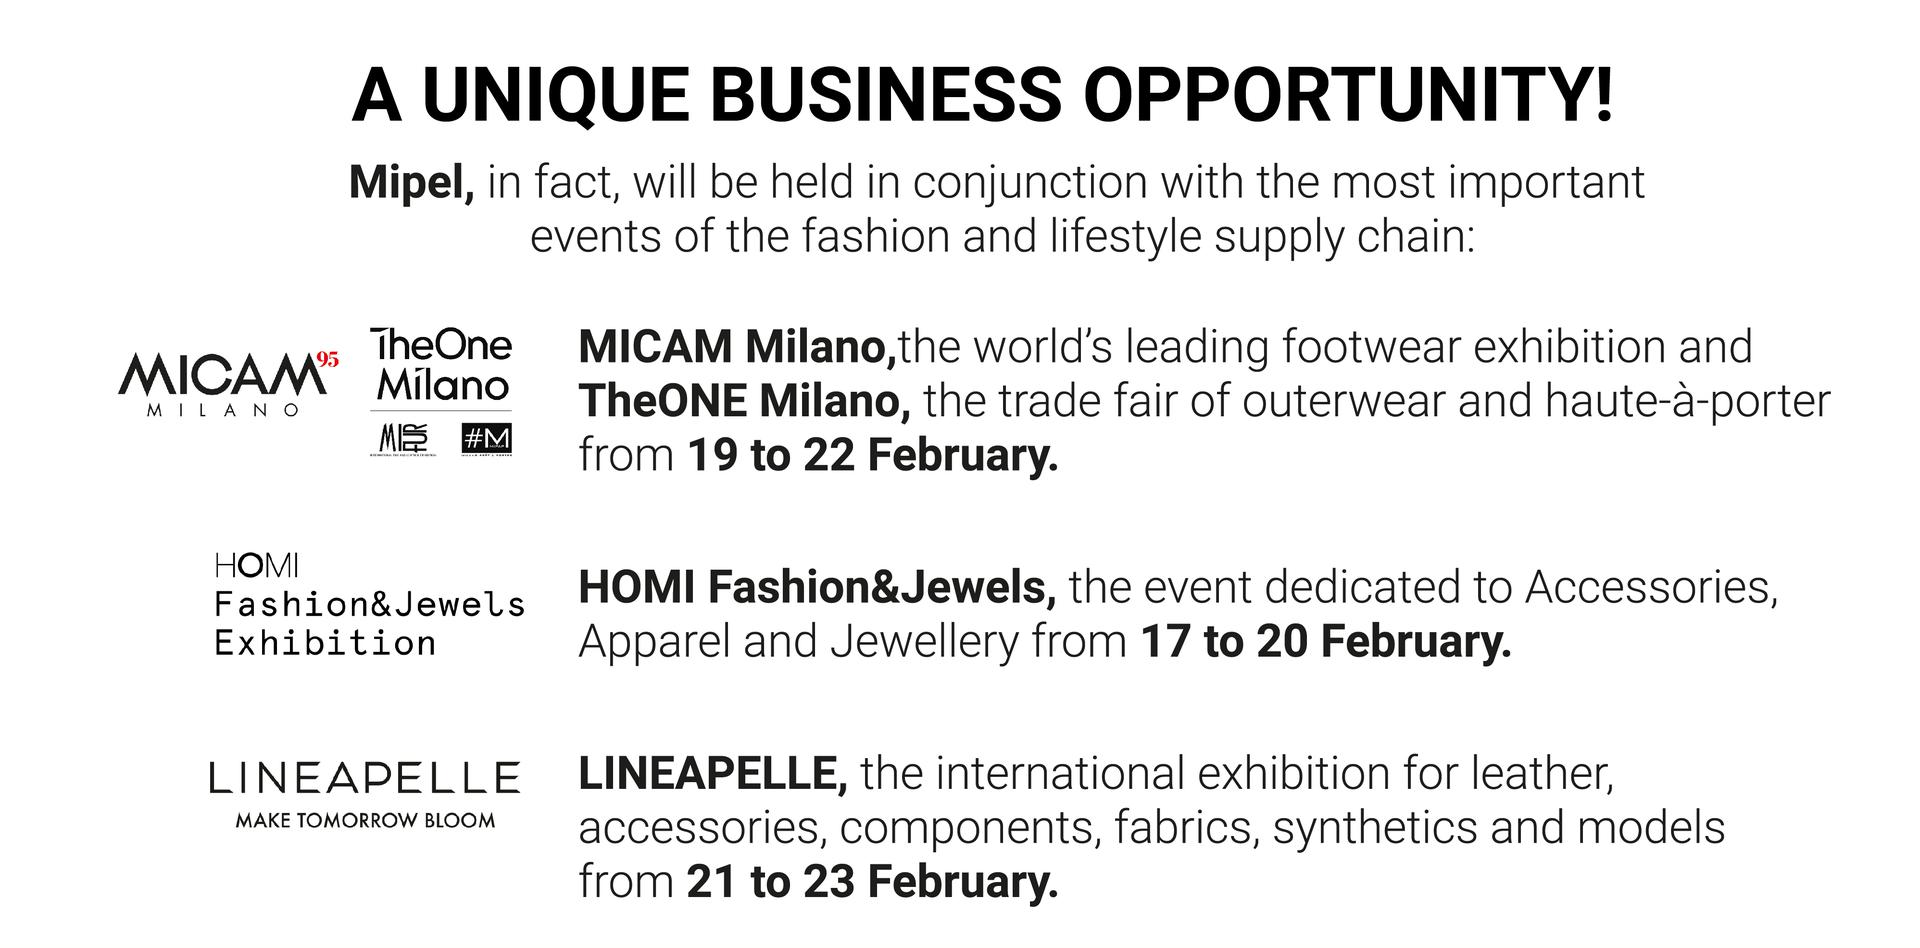 A UNIQUE BUSINESS OPPORTUNITY: MIPEL will be held in conjunction with the most important events of the fashion system; MICAM Milano and TheONE Milano (19/22 Feb), HOMI Fashion&Jewels (17/20 Feb) and LINEAPELLE (21/23 Feb)